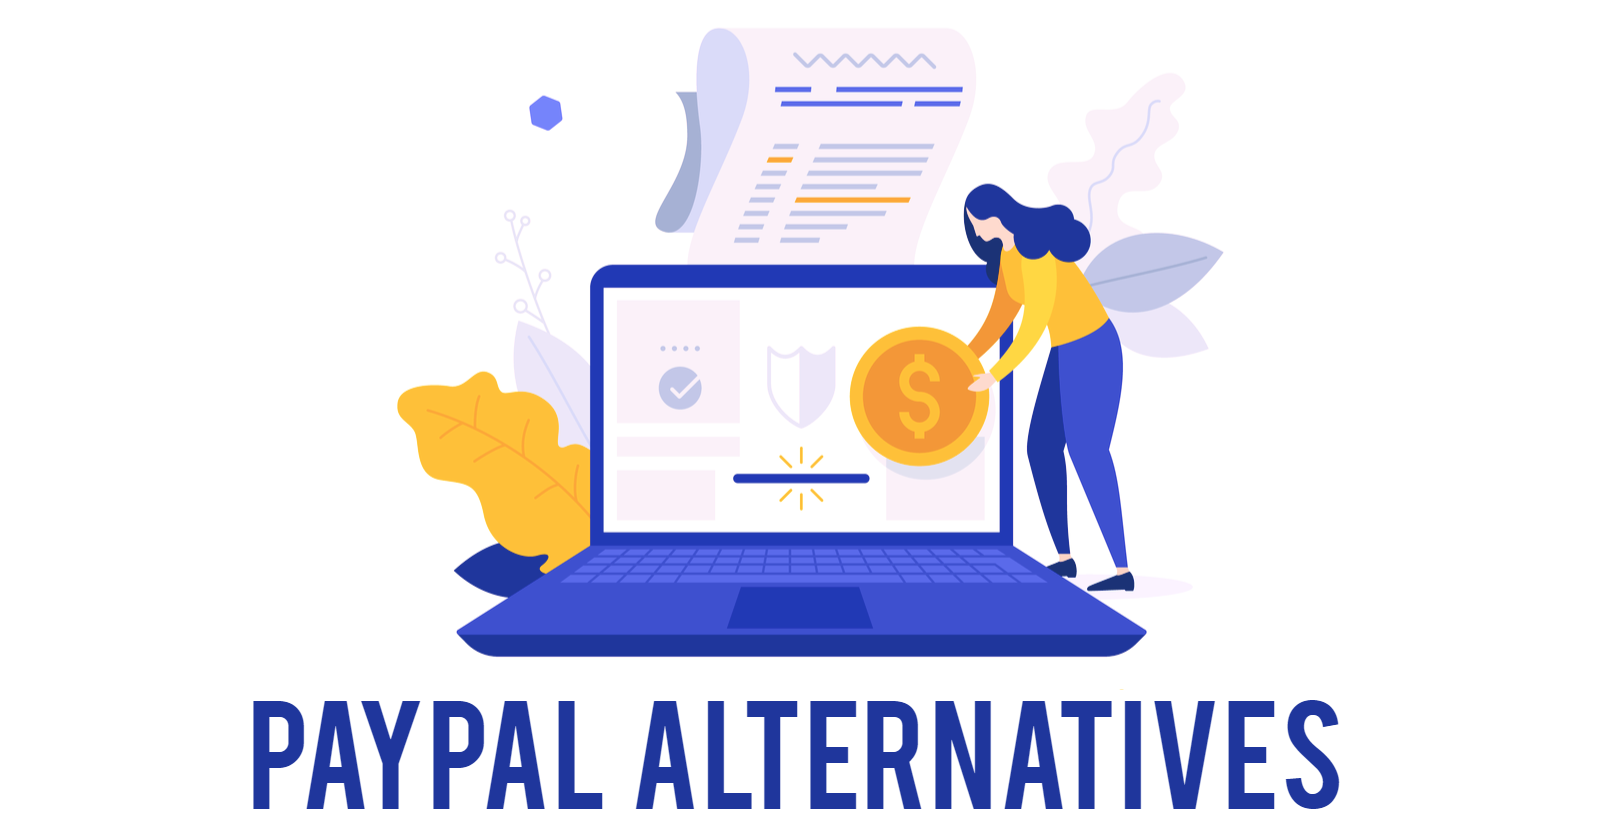 Popular PayPal alternatives for ecommerce companies.